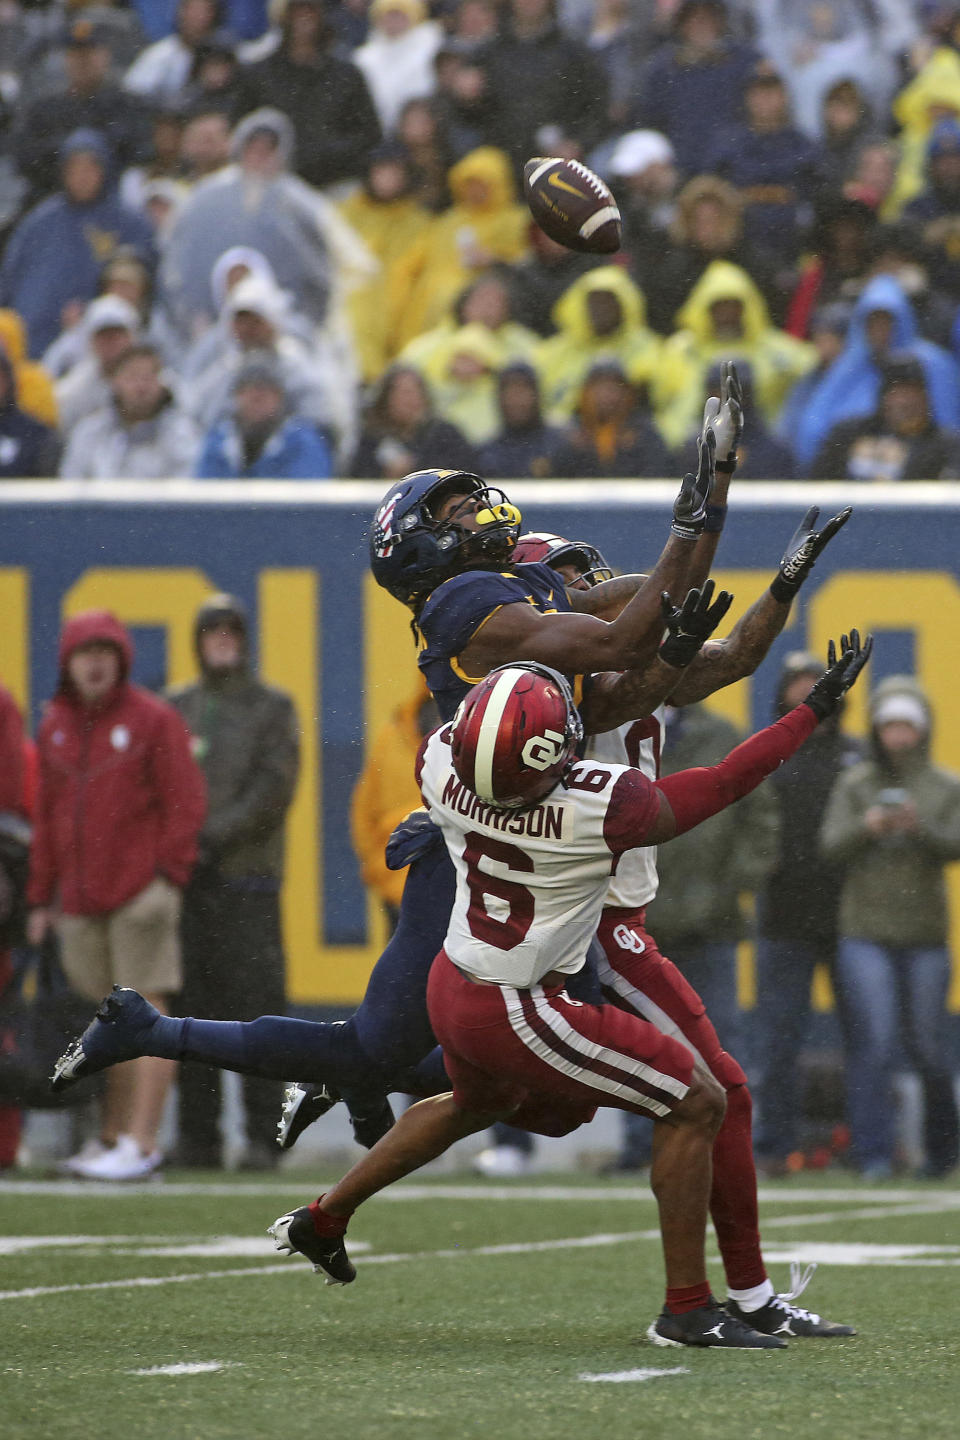 Oklahoma defensive backs Trey Morrison (6) and Woodi Washington (0) break up a pass intended for West Virginia wide receiver Bryce Ford-Wheaton (0) during the first half of an NCAA college football game in Morgantown, W.Va., Saturday, Nov. 12, 2022. (AP Photo/Kathleen Batten)